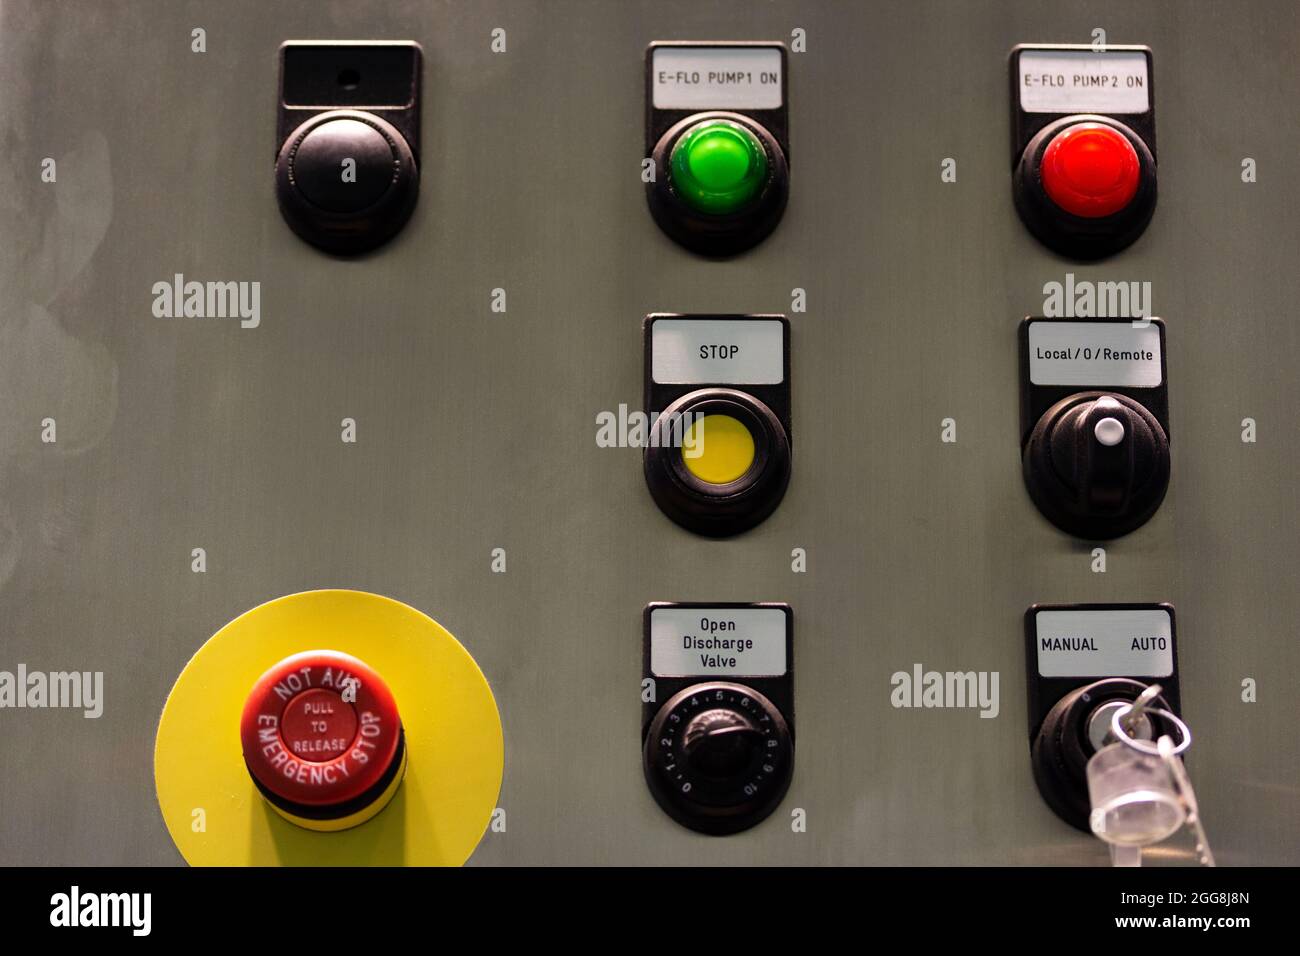 Pushbuttons and switches on the control panel of industrial equipment. Selective focus. Stock Photo